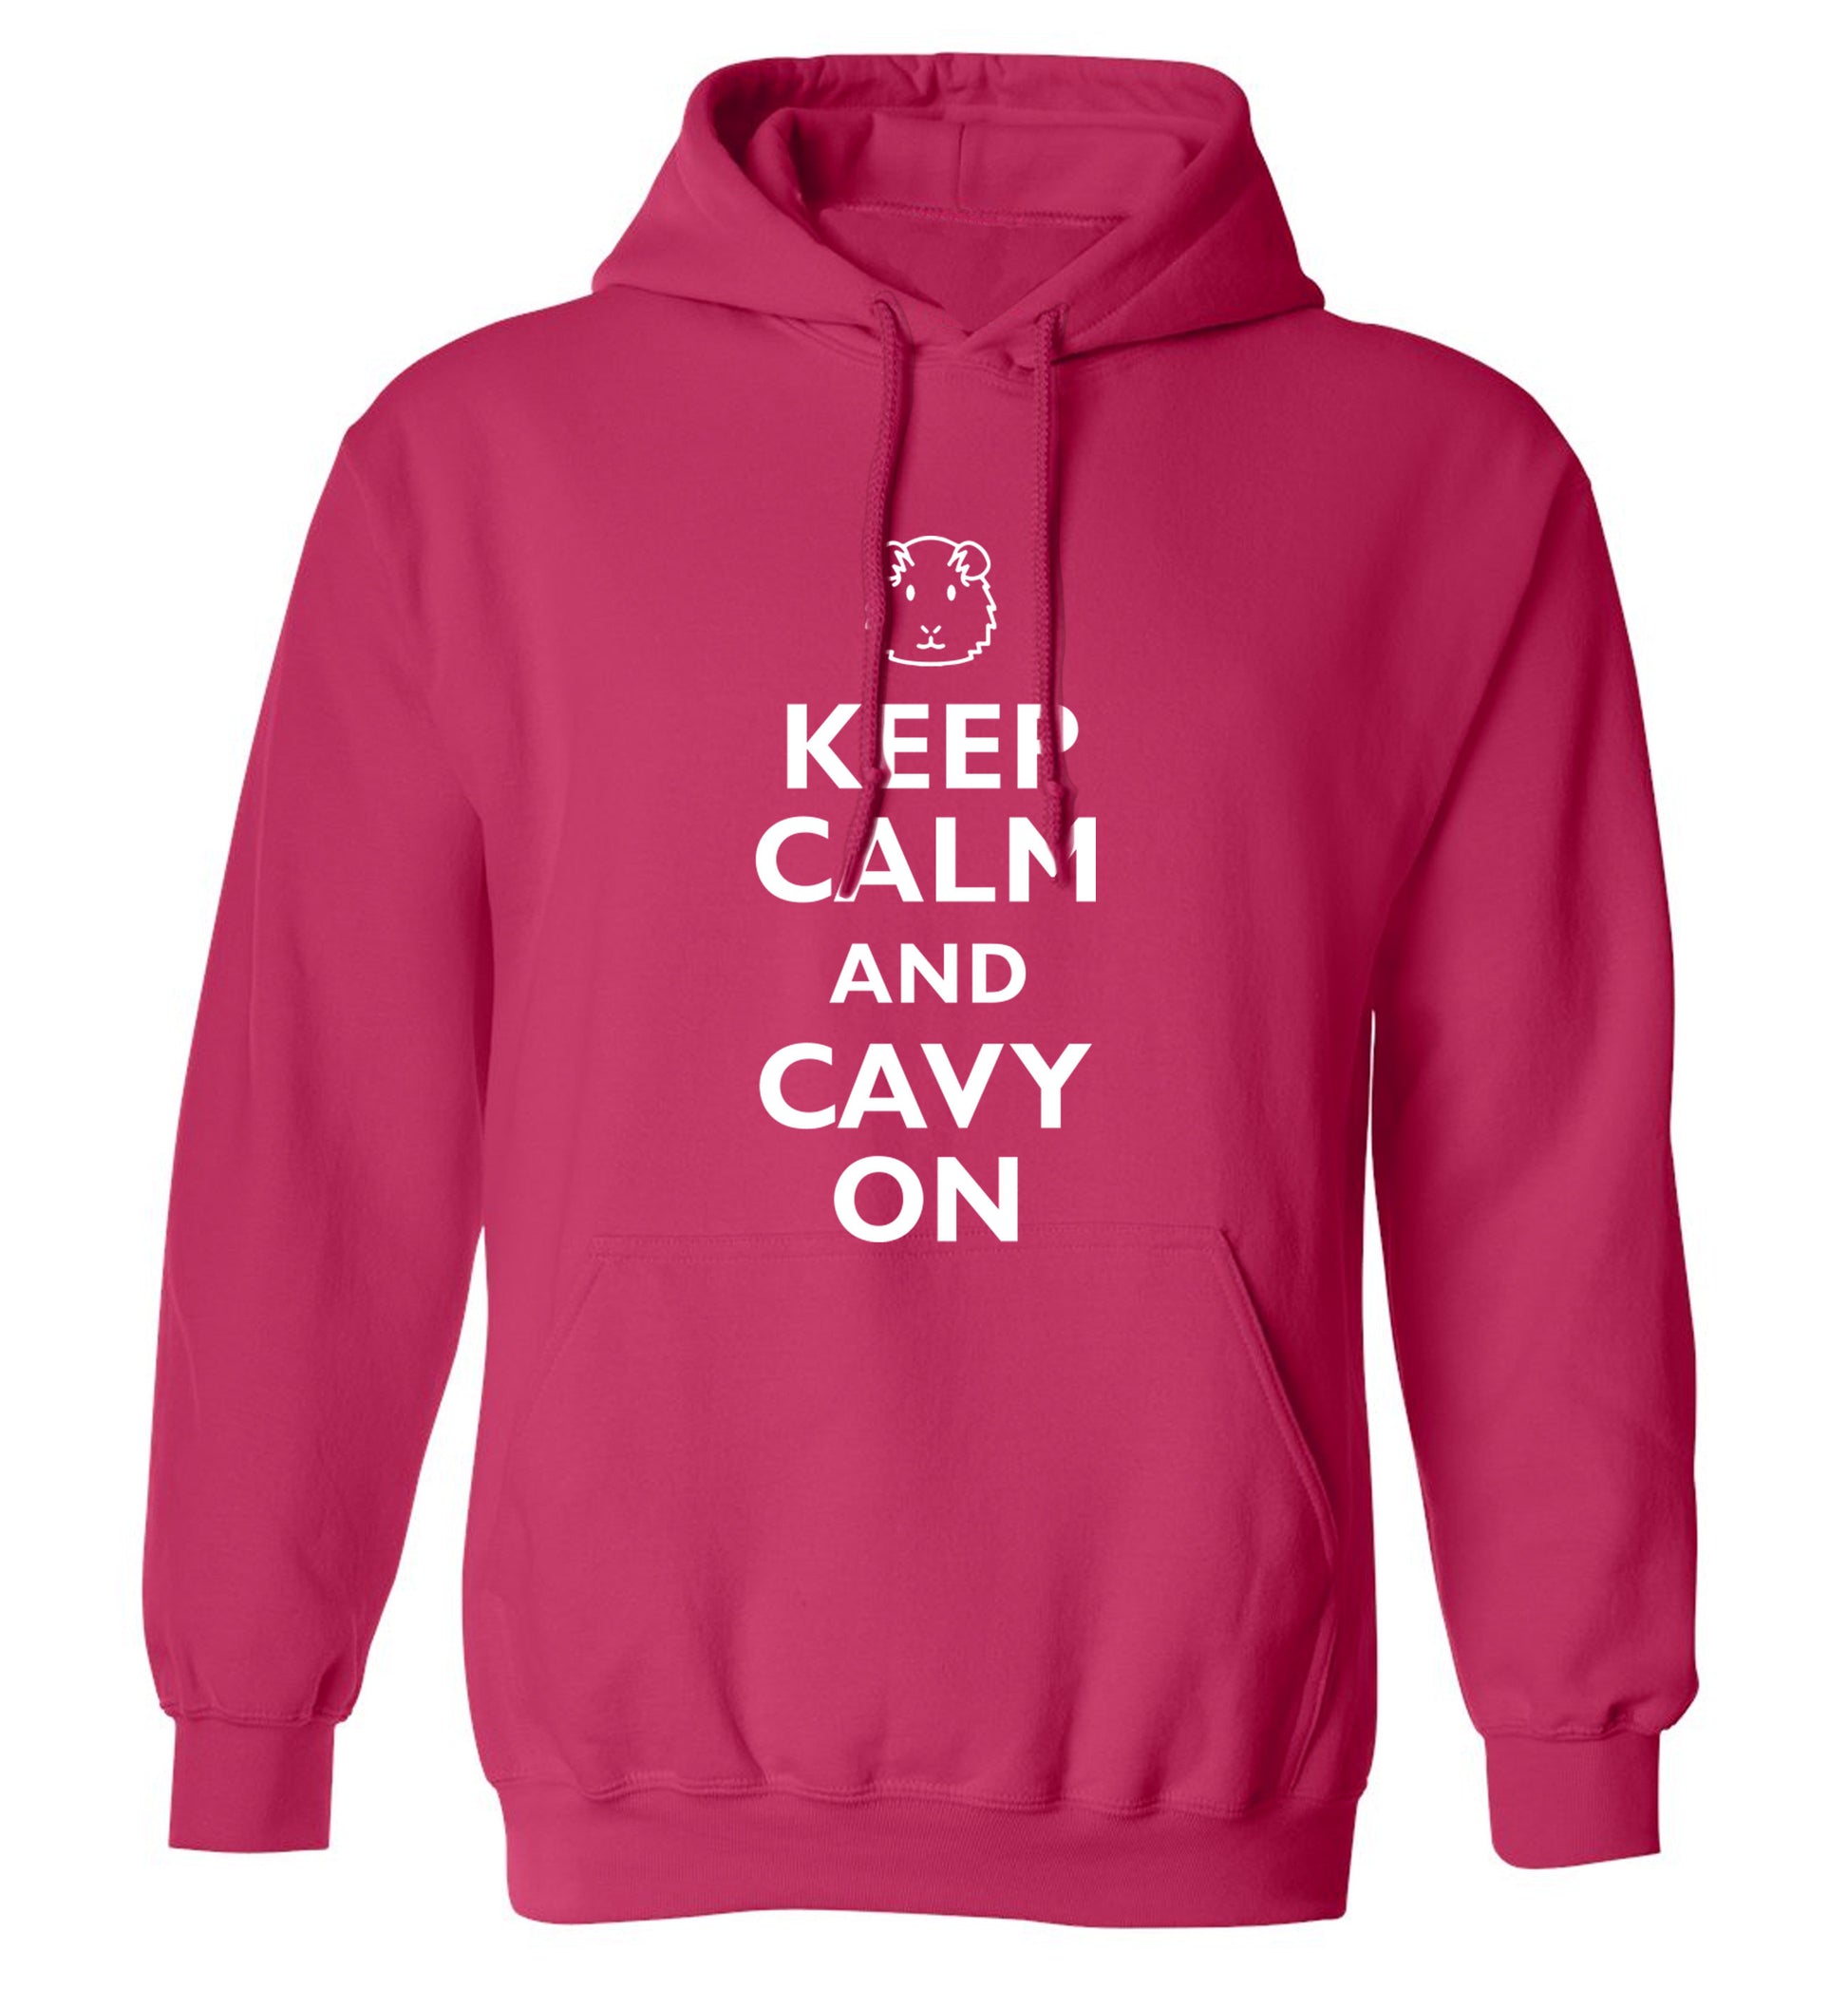 Keep calm and cavvy on adults unisex pink hoodie 2XL